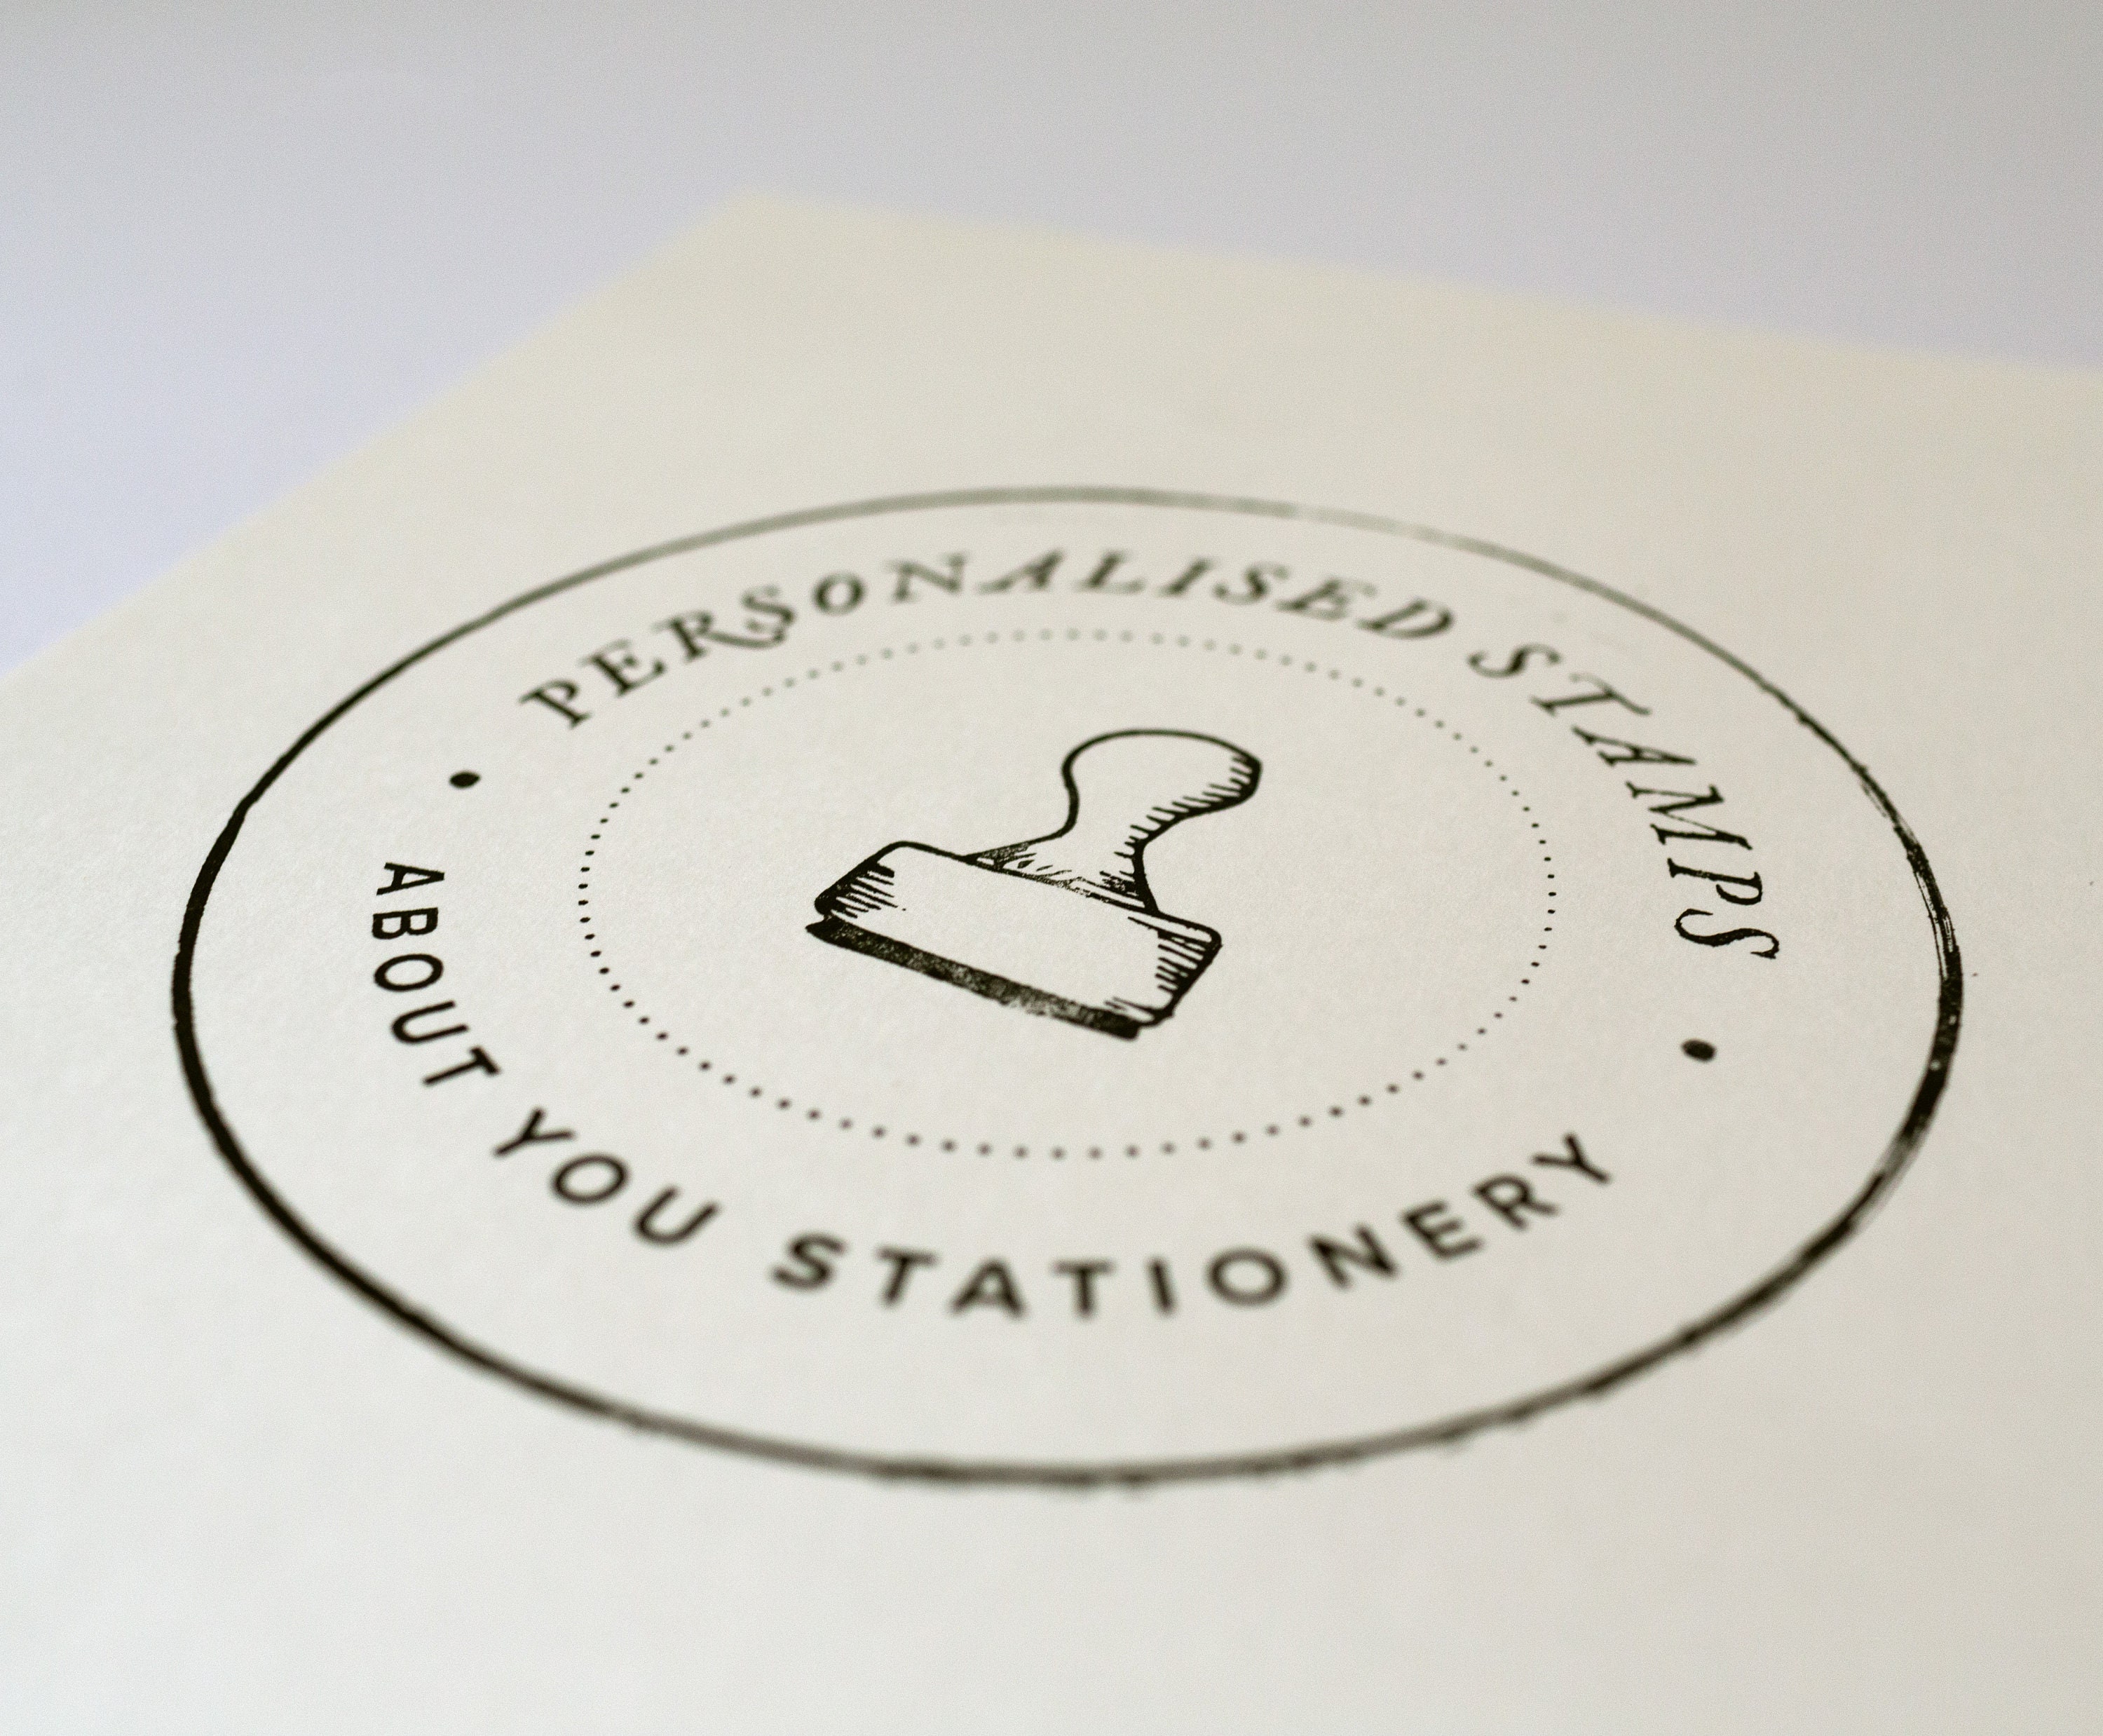 Personalised From the Library of Stamp, Eco-friendly Rubber Stamp